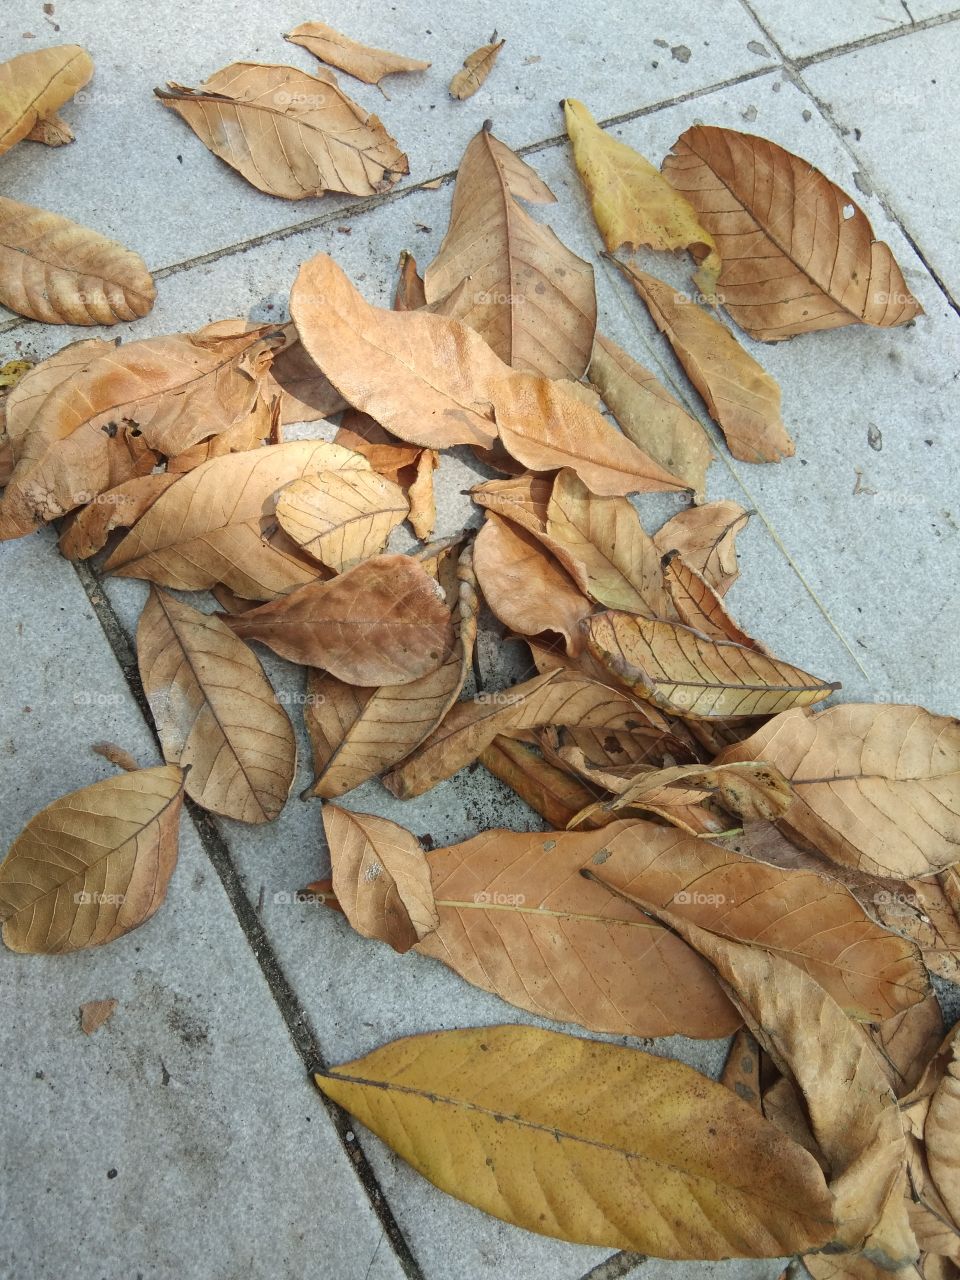 dry leaves scattered on the road